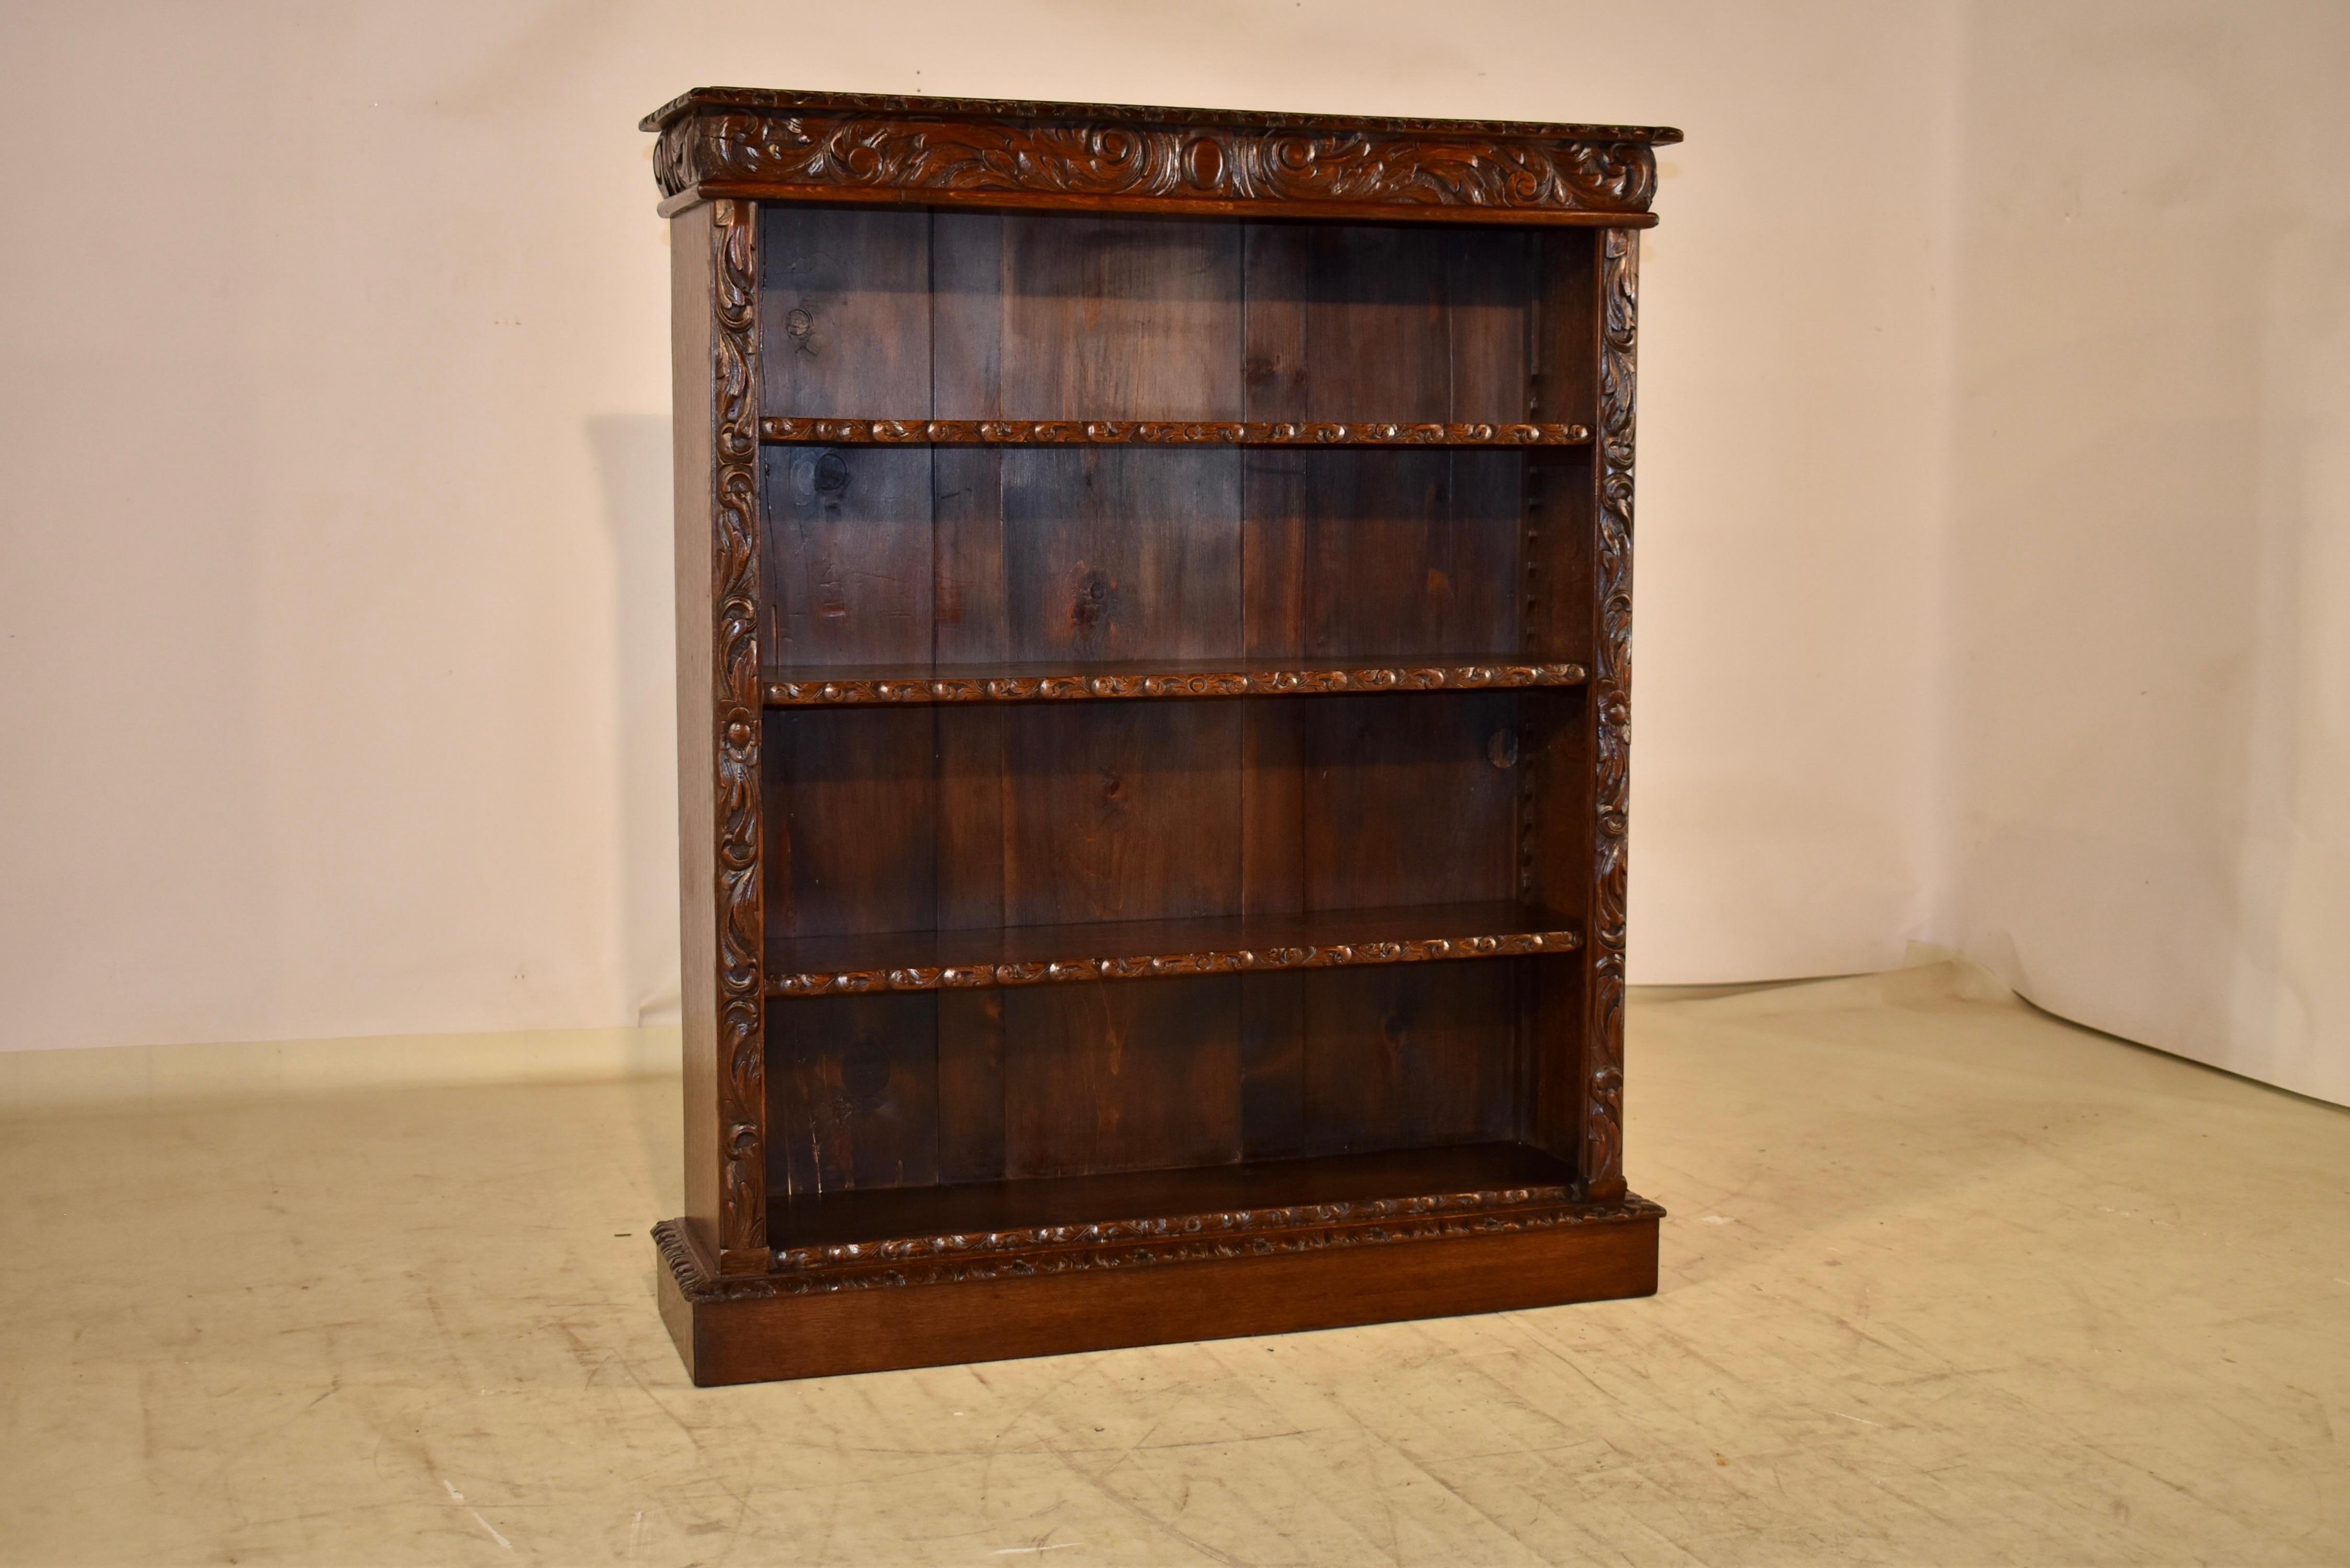 19th century oak bookcase from France.  The top has a beveled and hand carved decorated edge, following down to a carved upper band which extends to both sides for added design interest.  The piece has three moveable shelves, all with hand carved